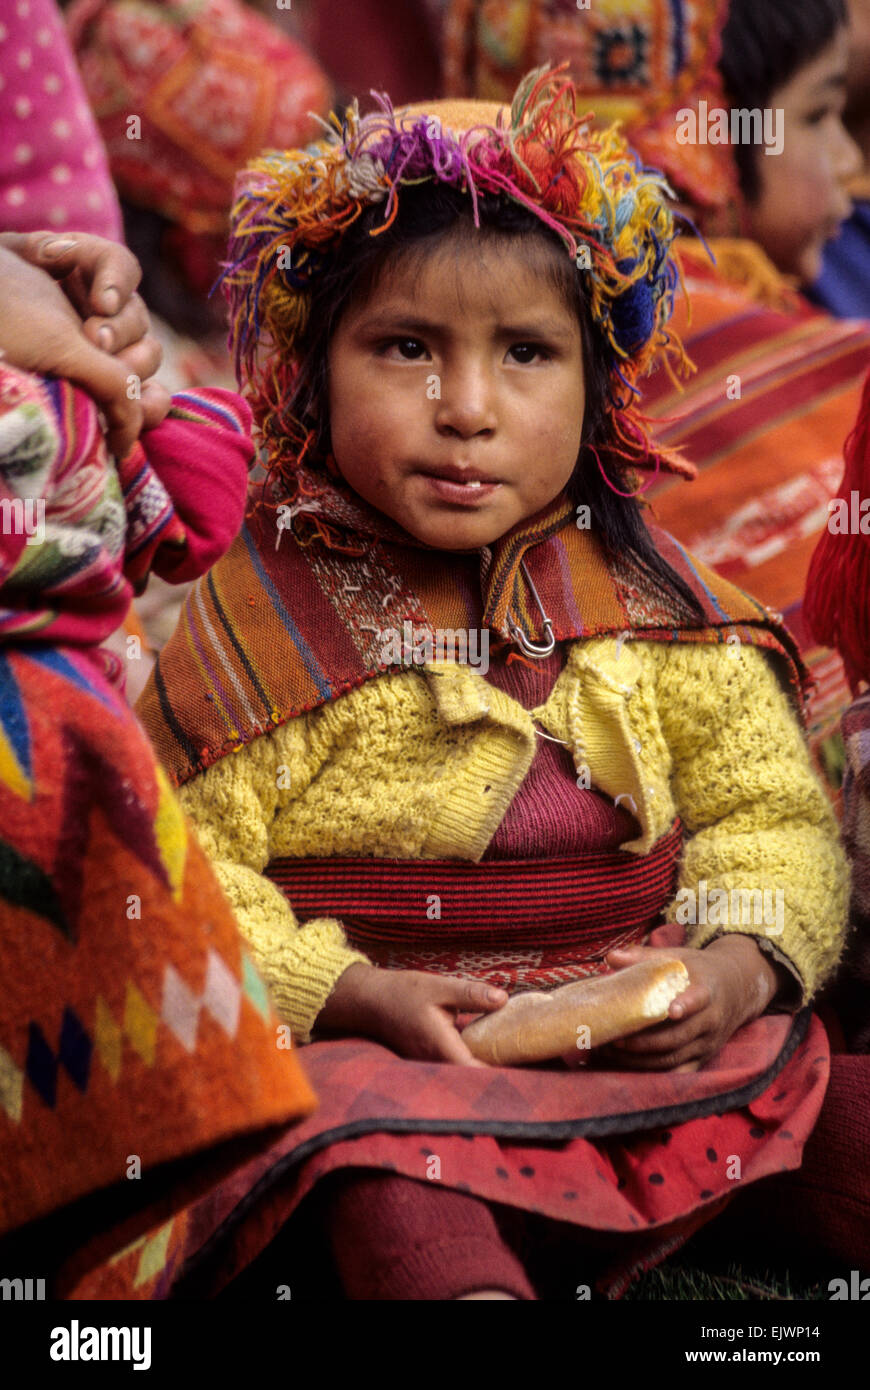 Peru, Willoq.  Little Quechua Girl Eating Bread for Lunch. Stock Photo